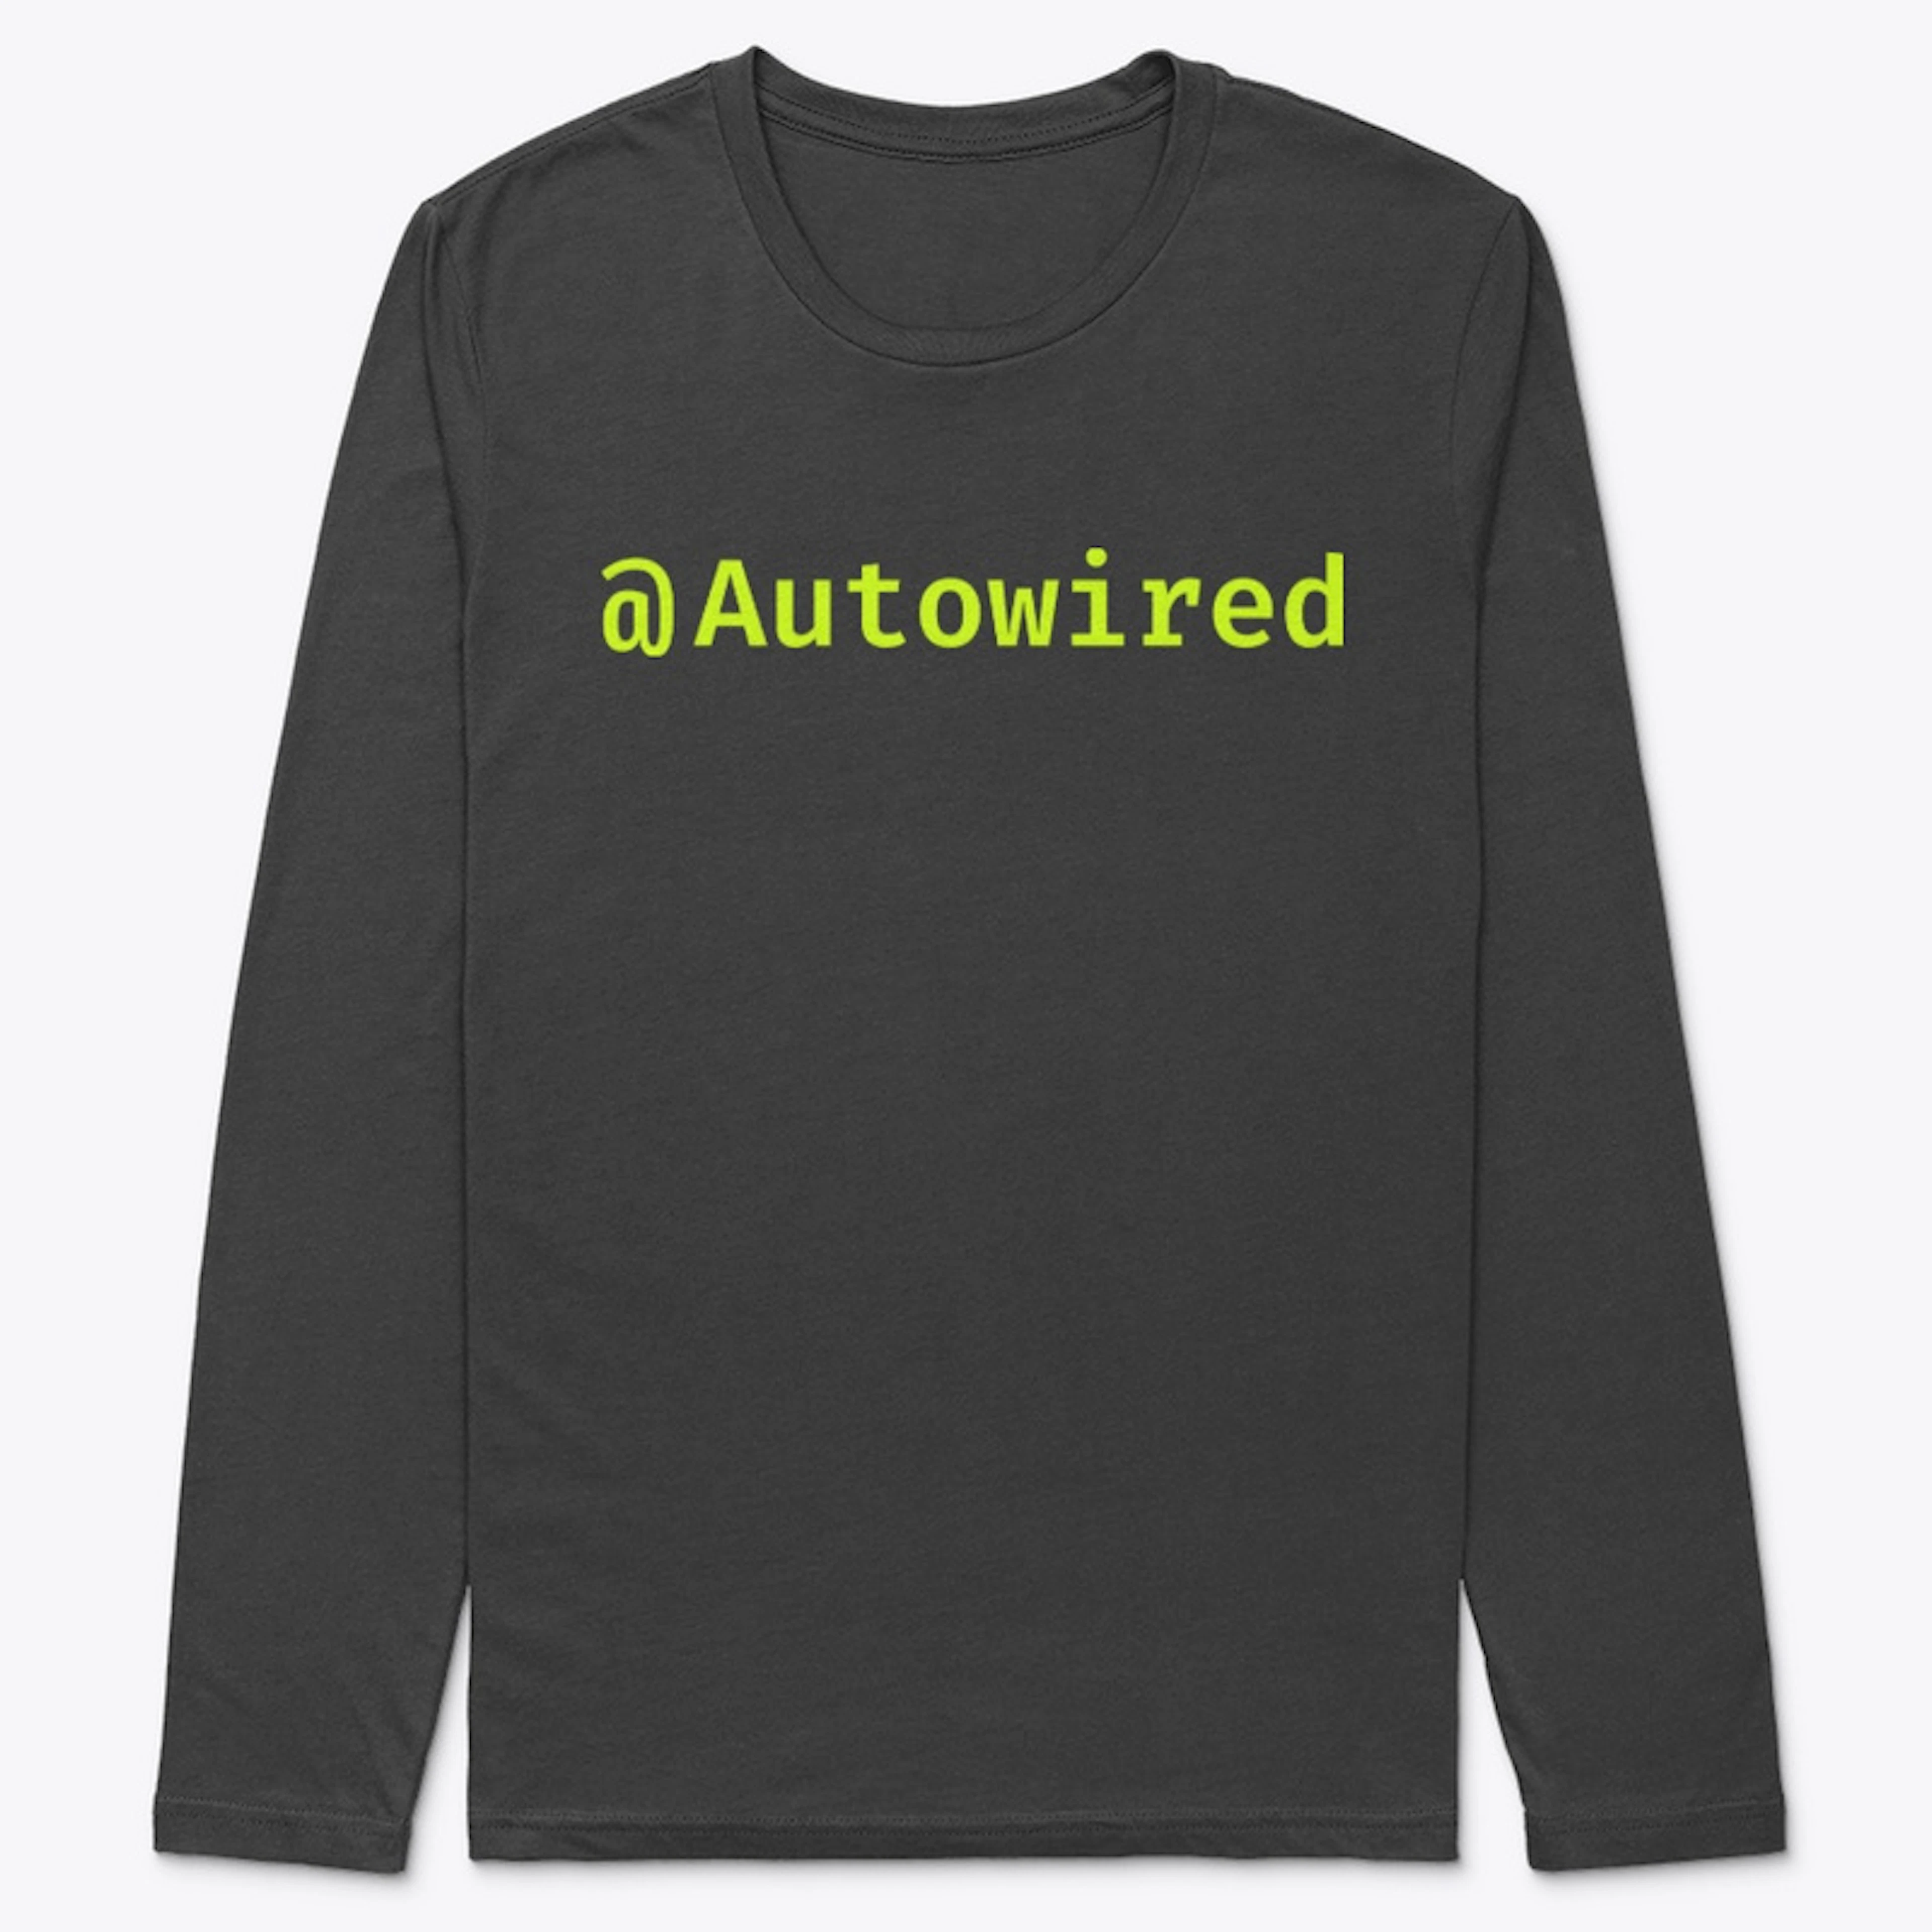 Autowired annotation